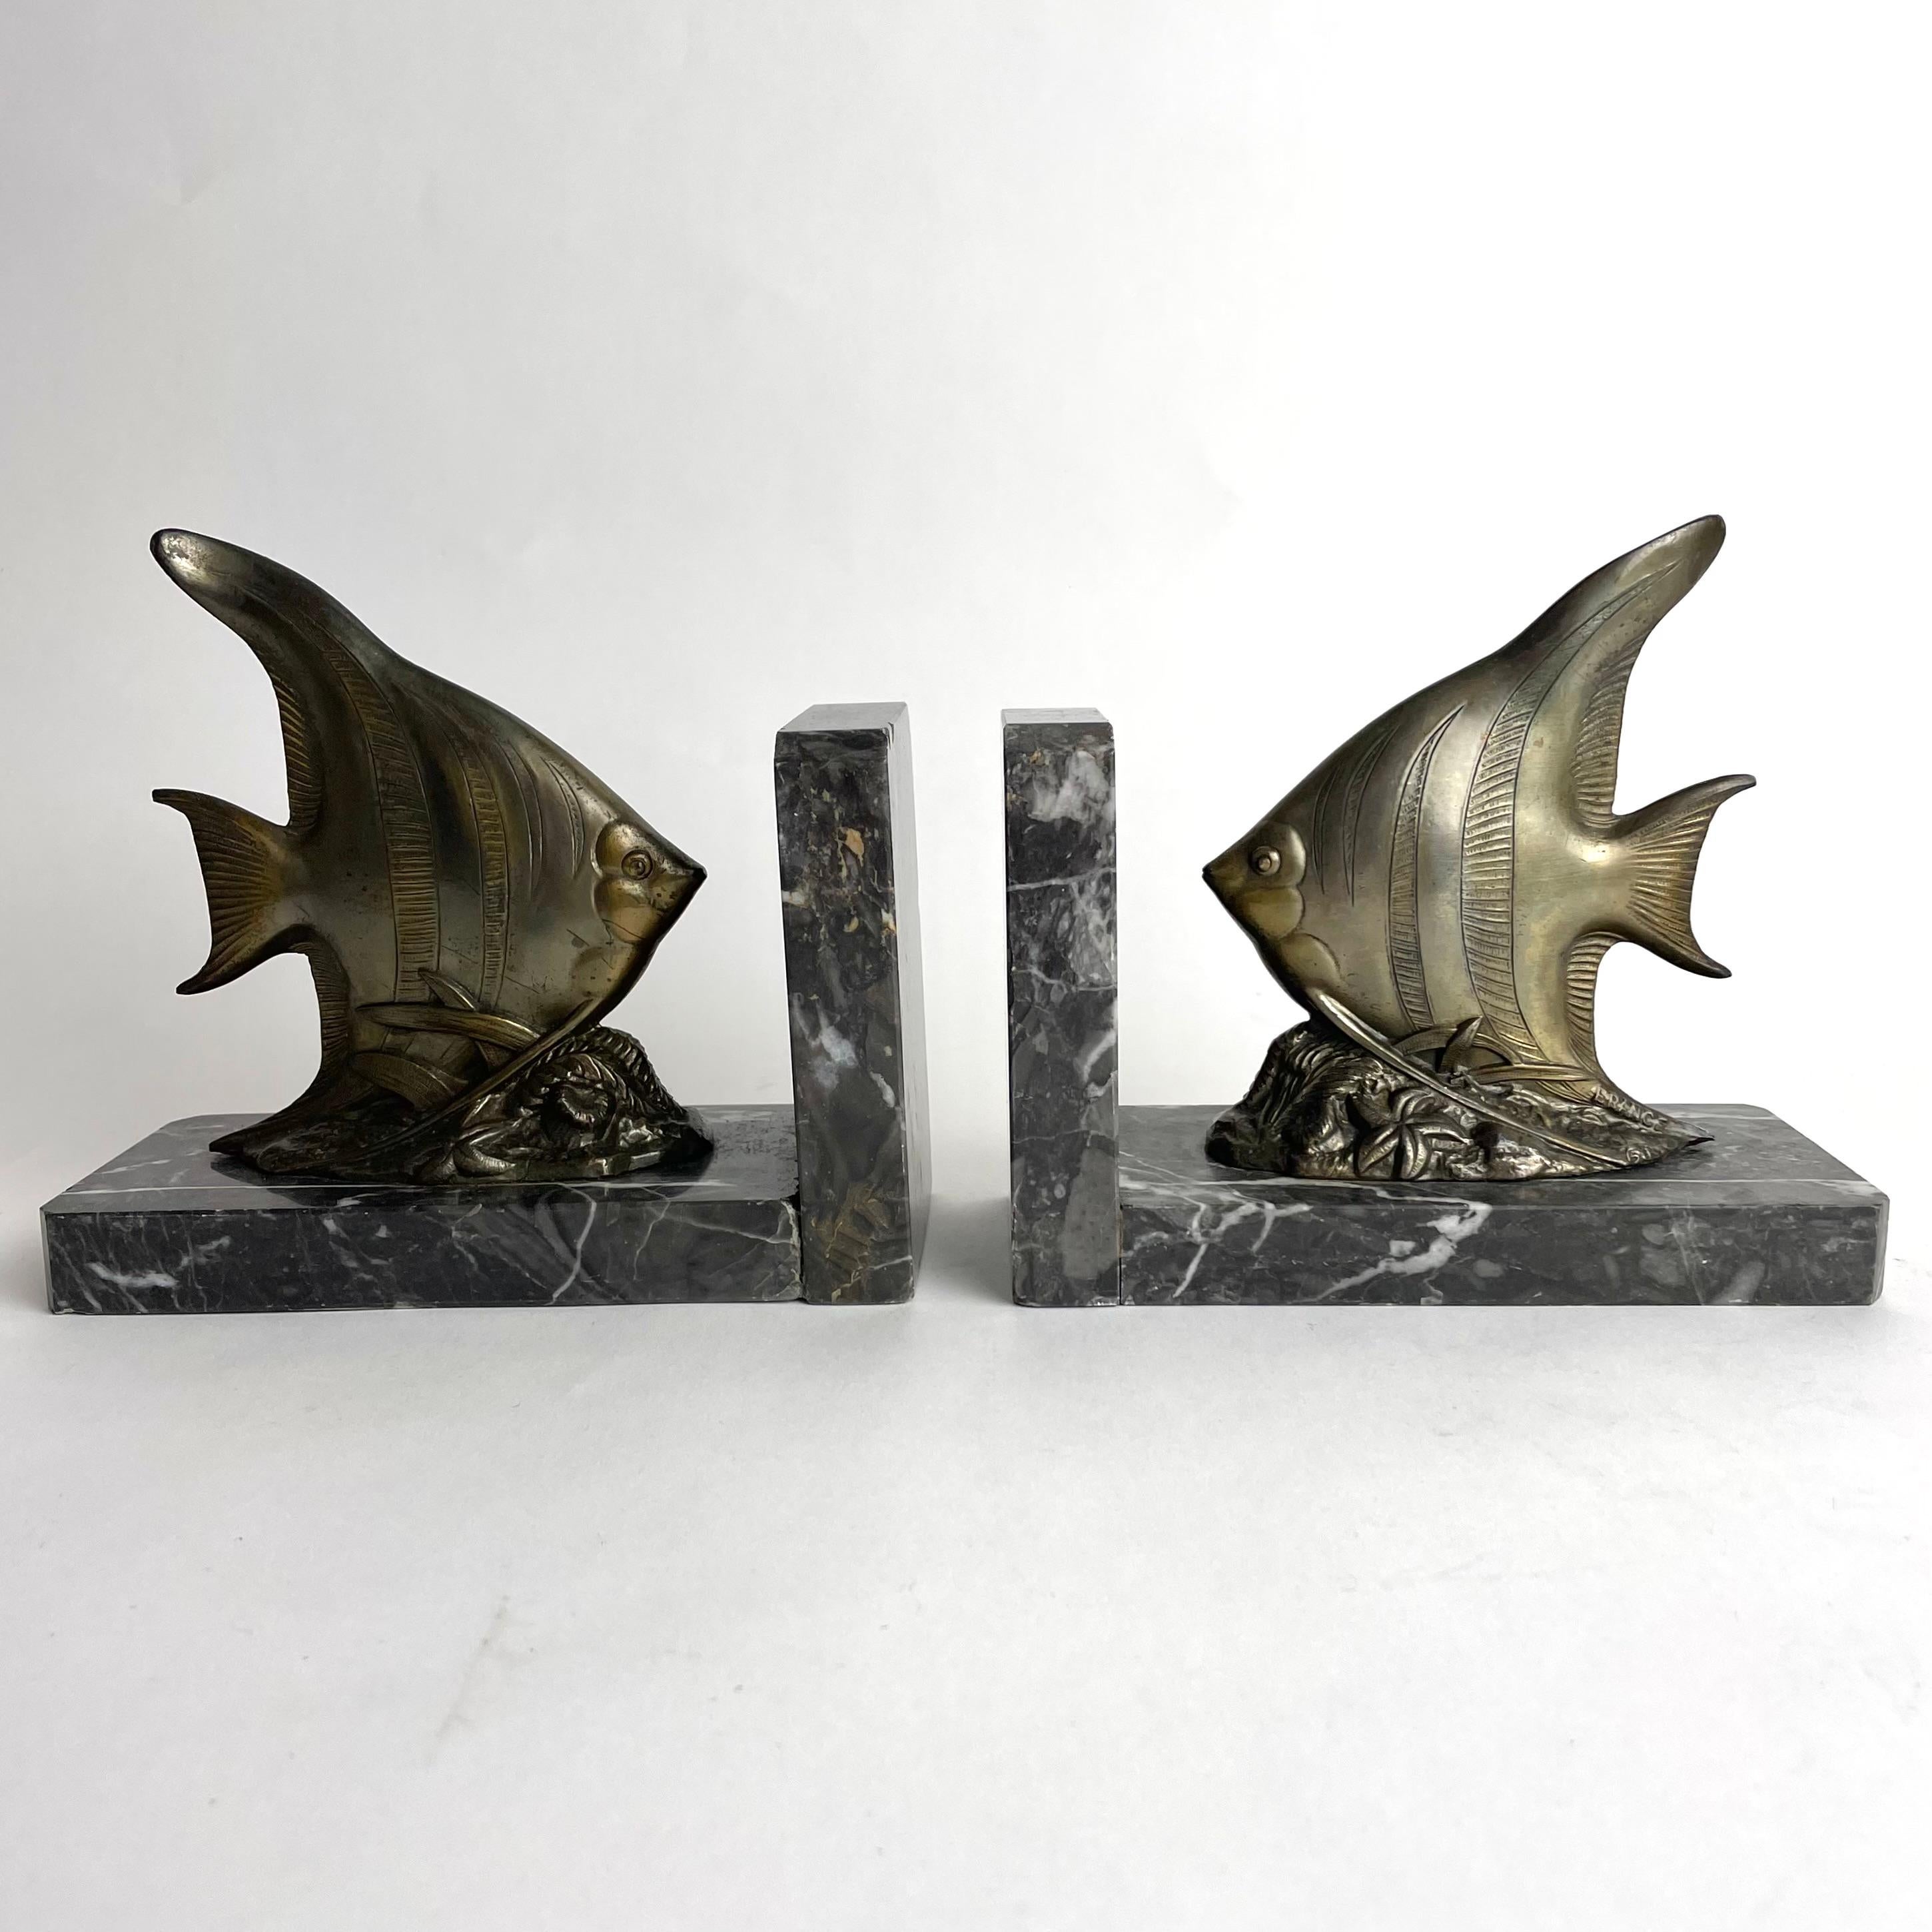 A beautiful pair of Art Deco Bookends from the 1930s with very period fishes. Made in France in patinated metal with a marble base.

Wear consistent with age and use 